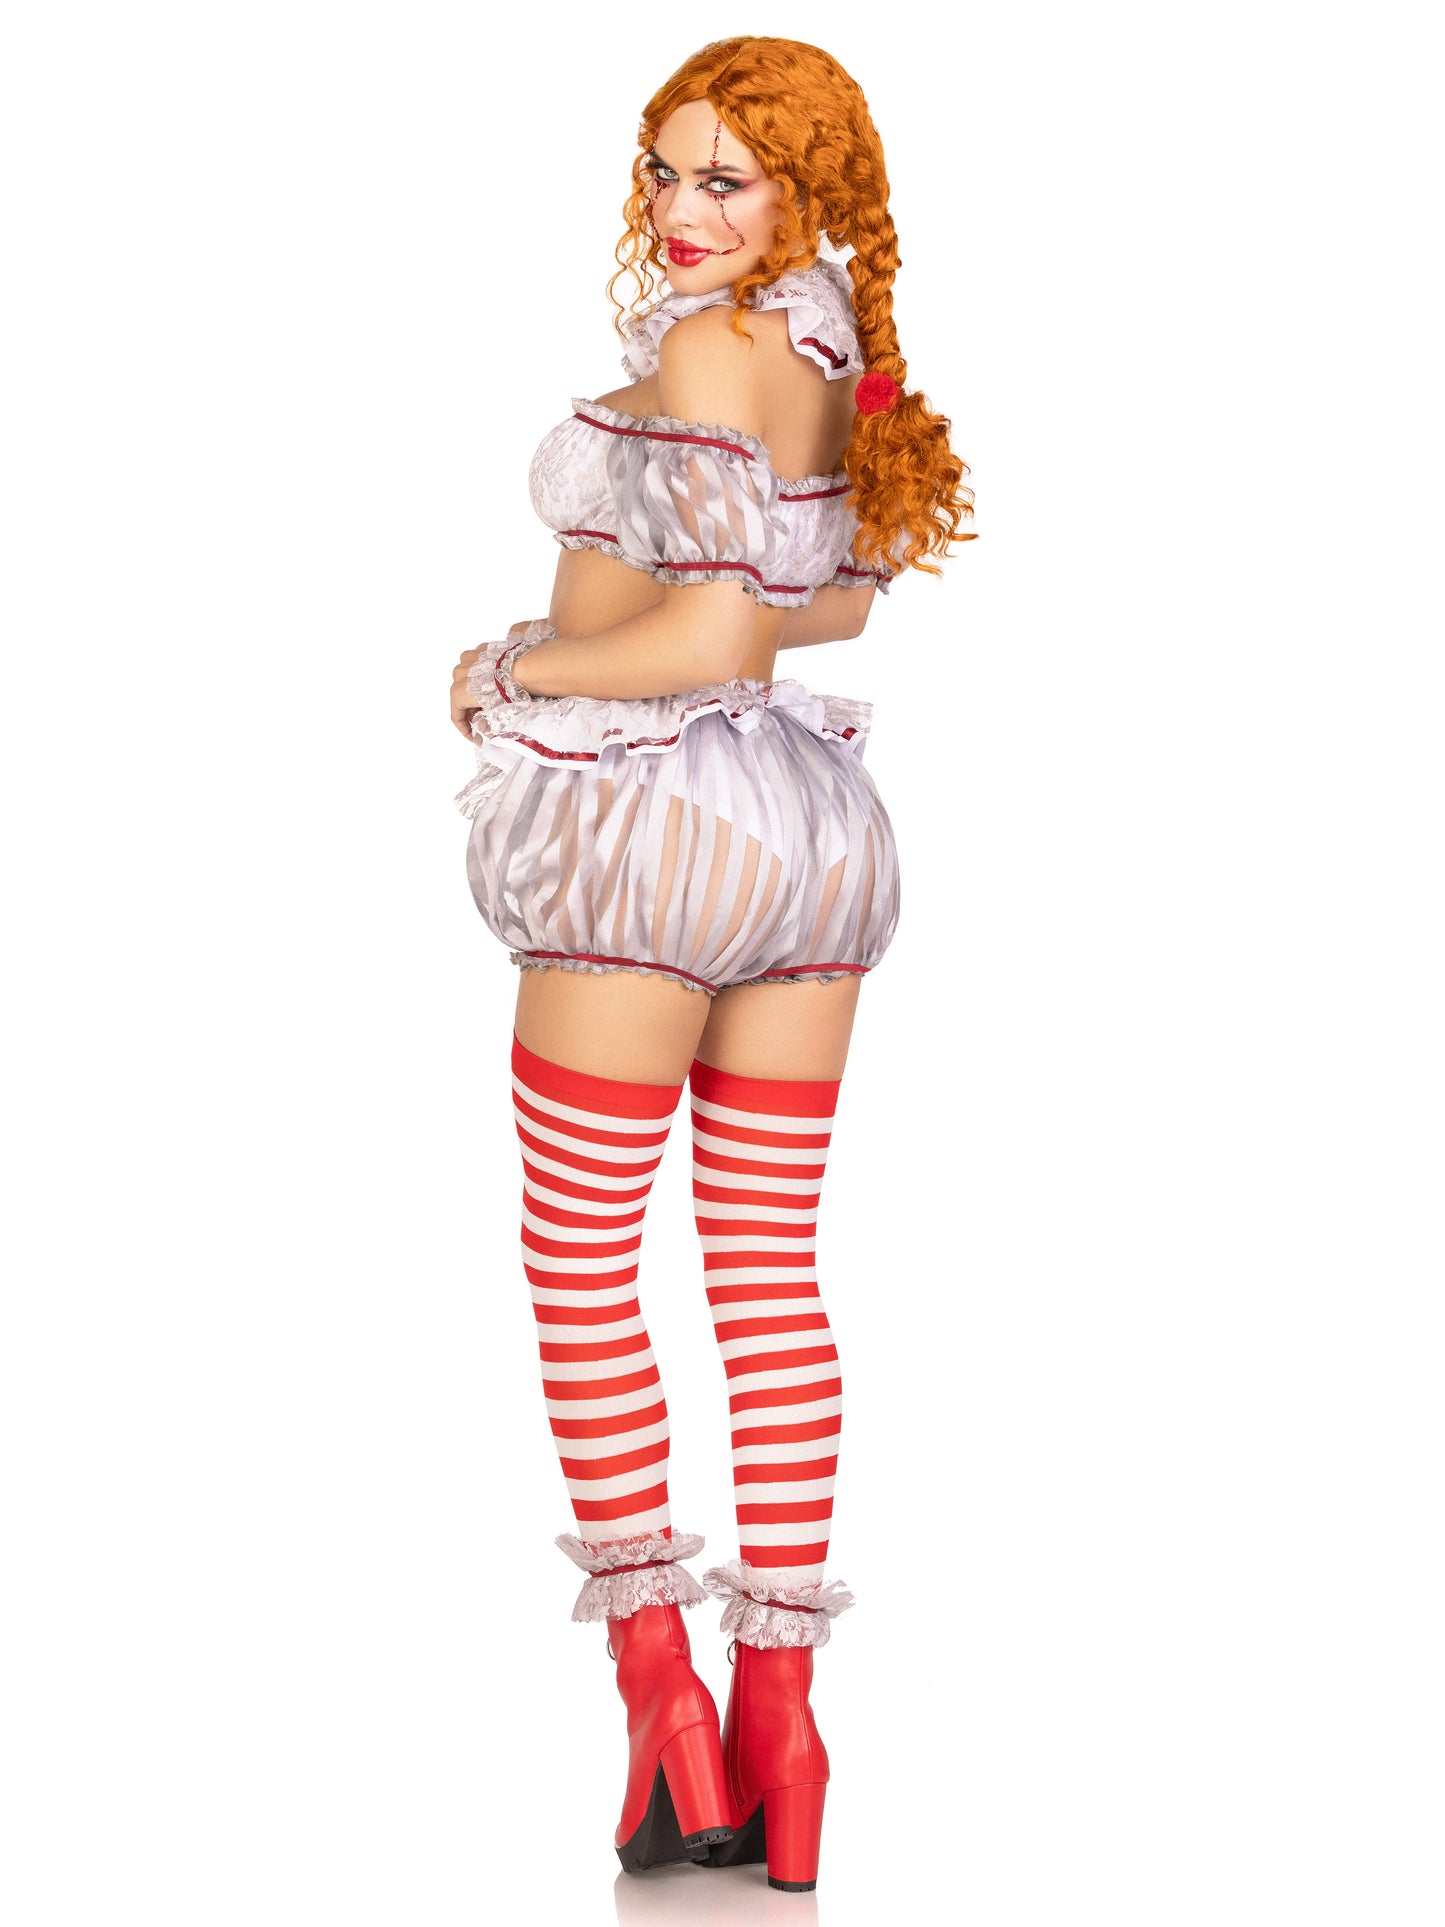 Deadly Darling Clown Costume